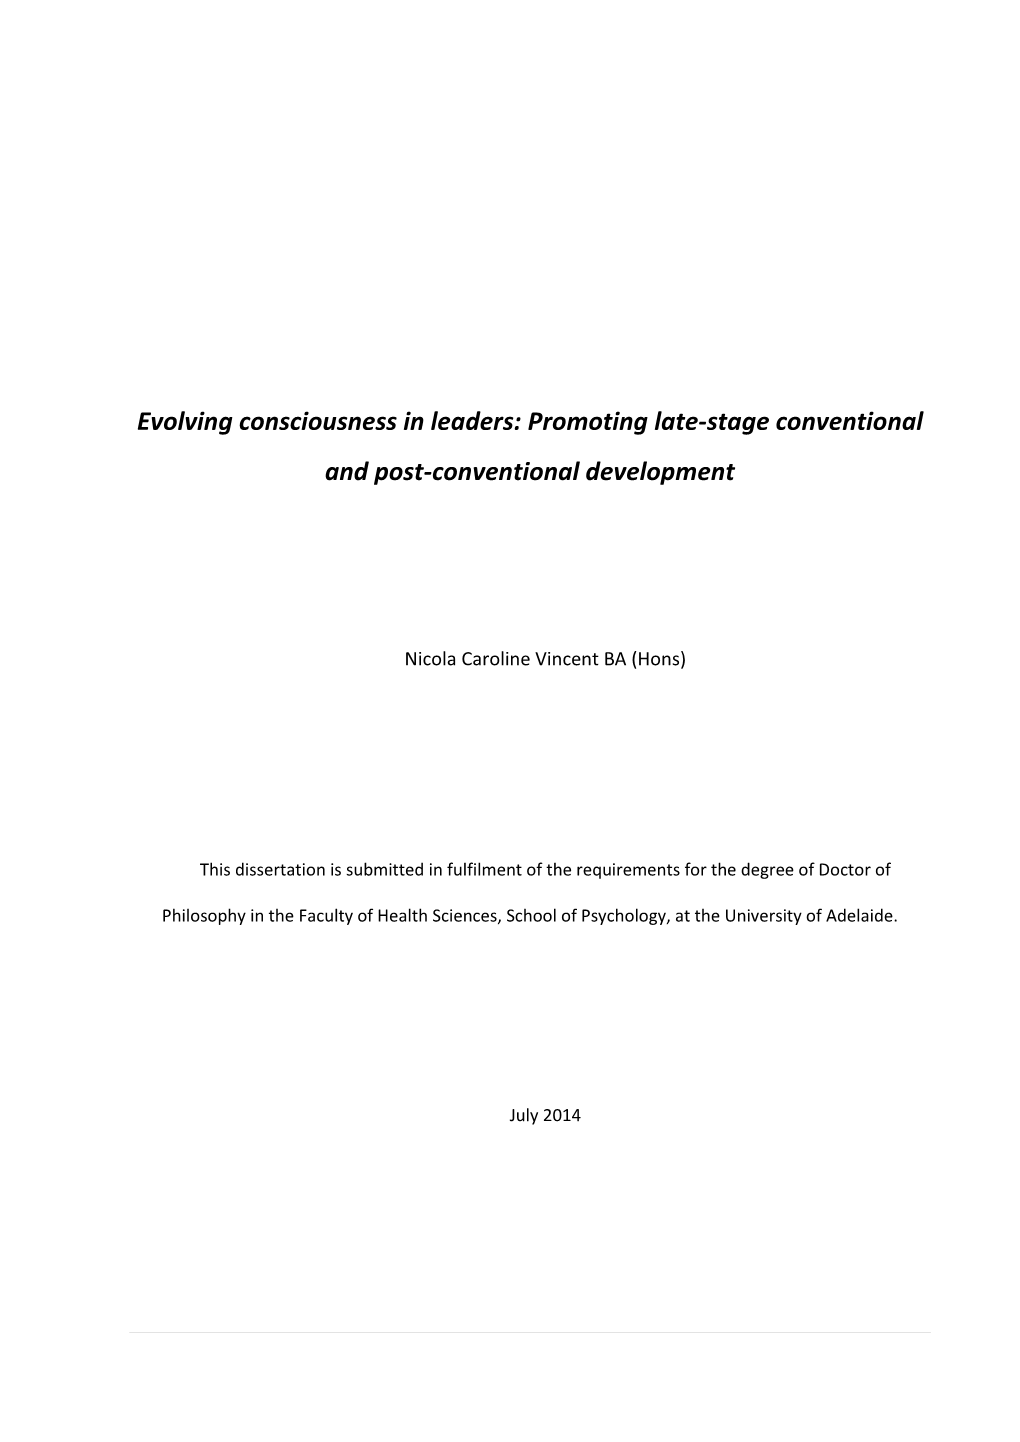 Evolving Consciousness in Leaders: Promoting Late-Stage Conventional and Post-Conventional Development